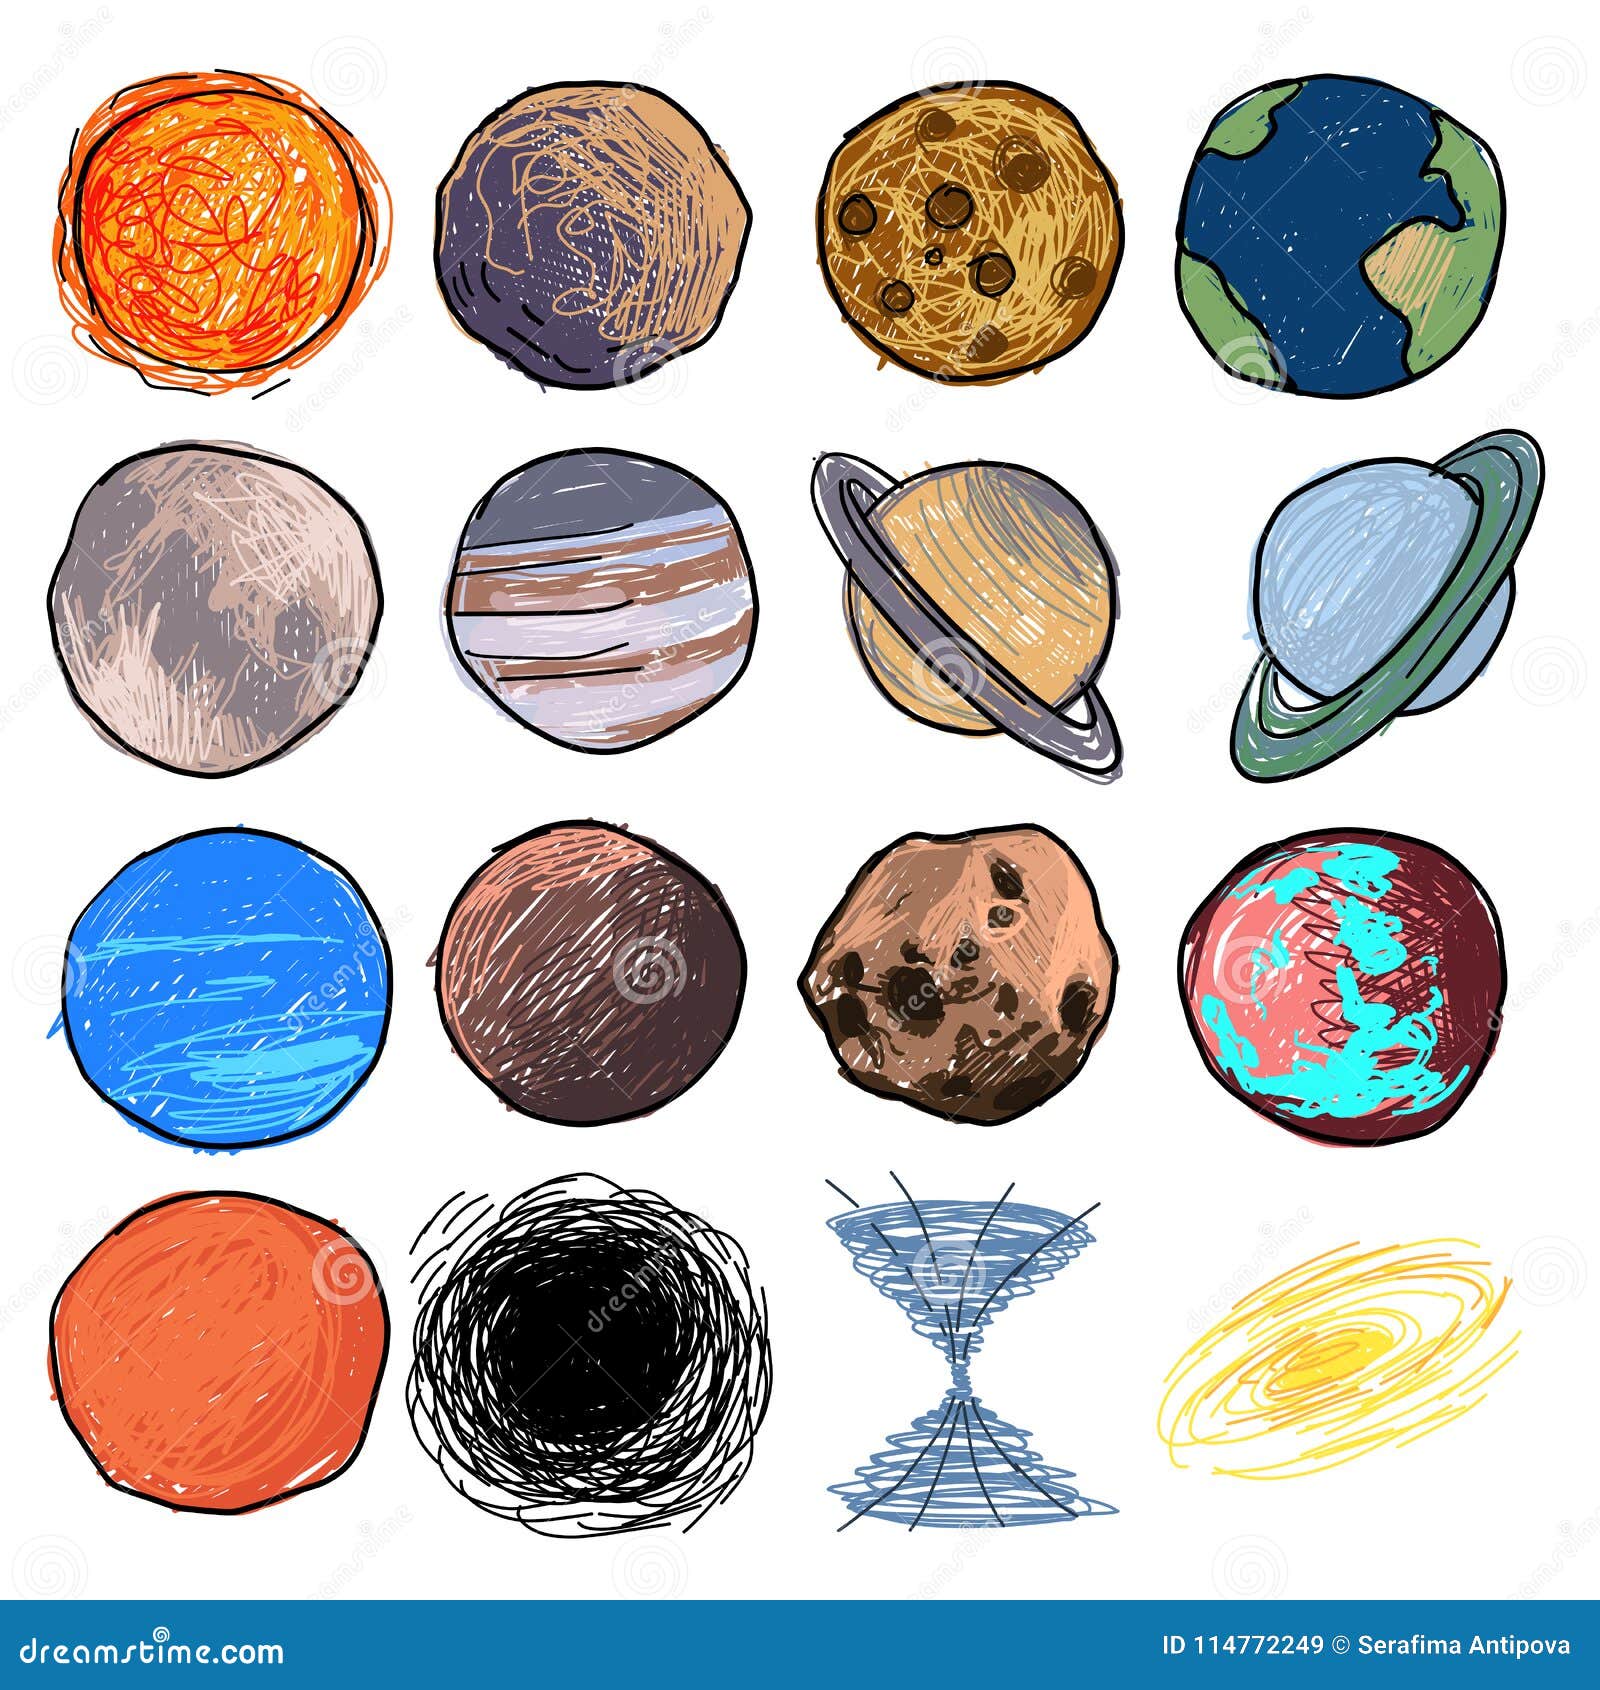 Galaxy Illustrations and Clipart. 242,732 Galaxy royalty free  illustrations, and drawings available to search from thousands of stock  vector EPS clip art graphic designers.